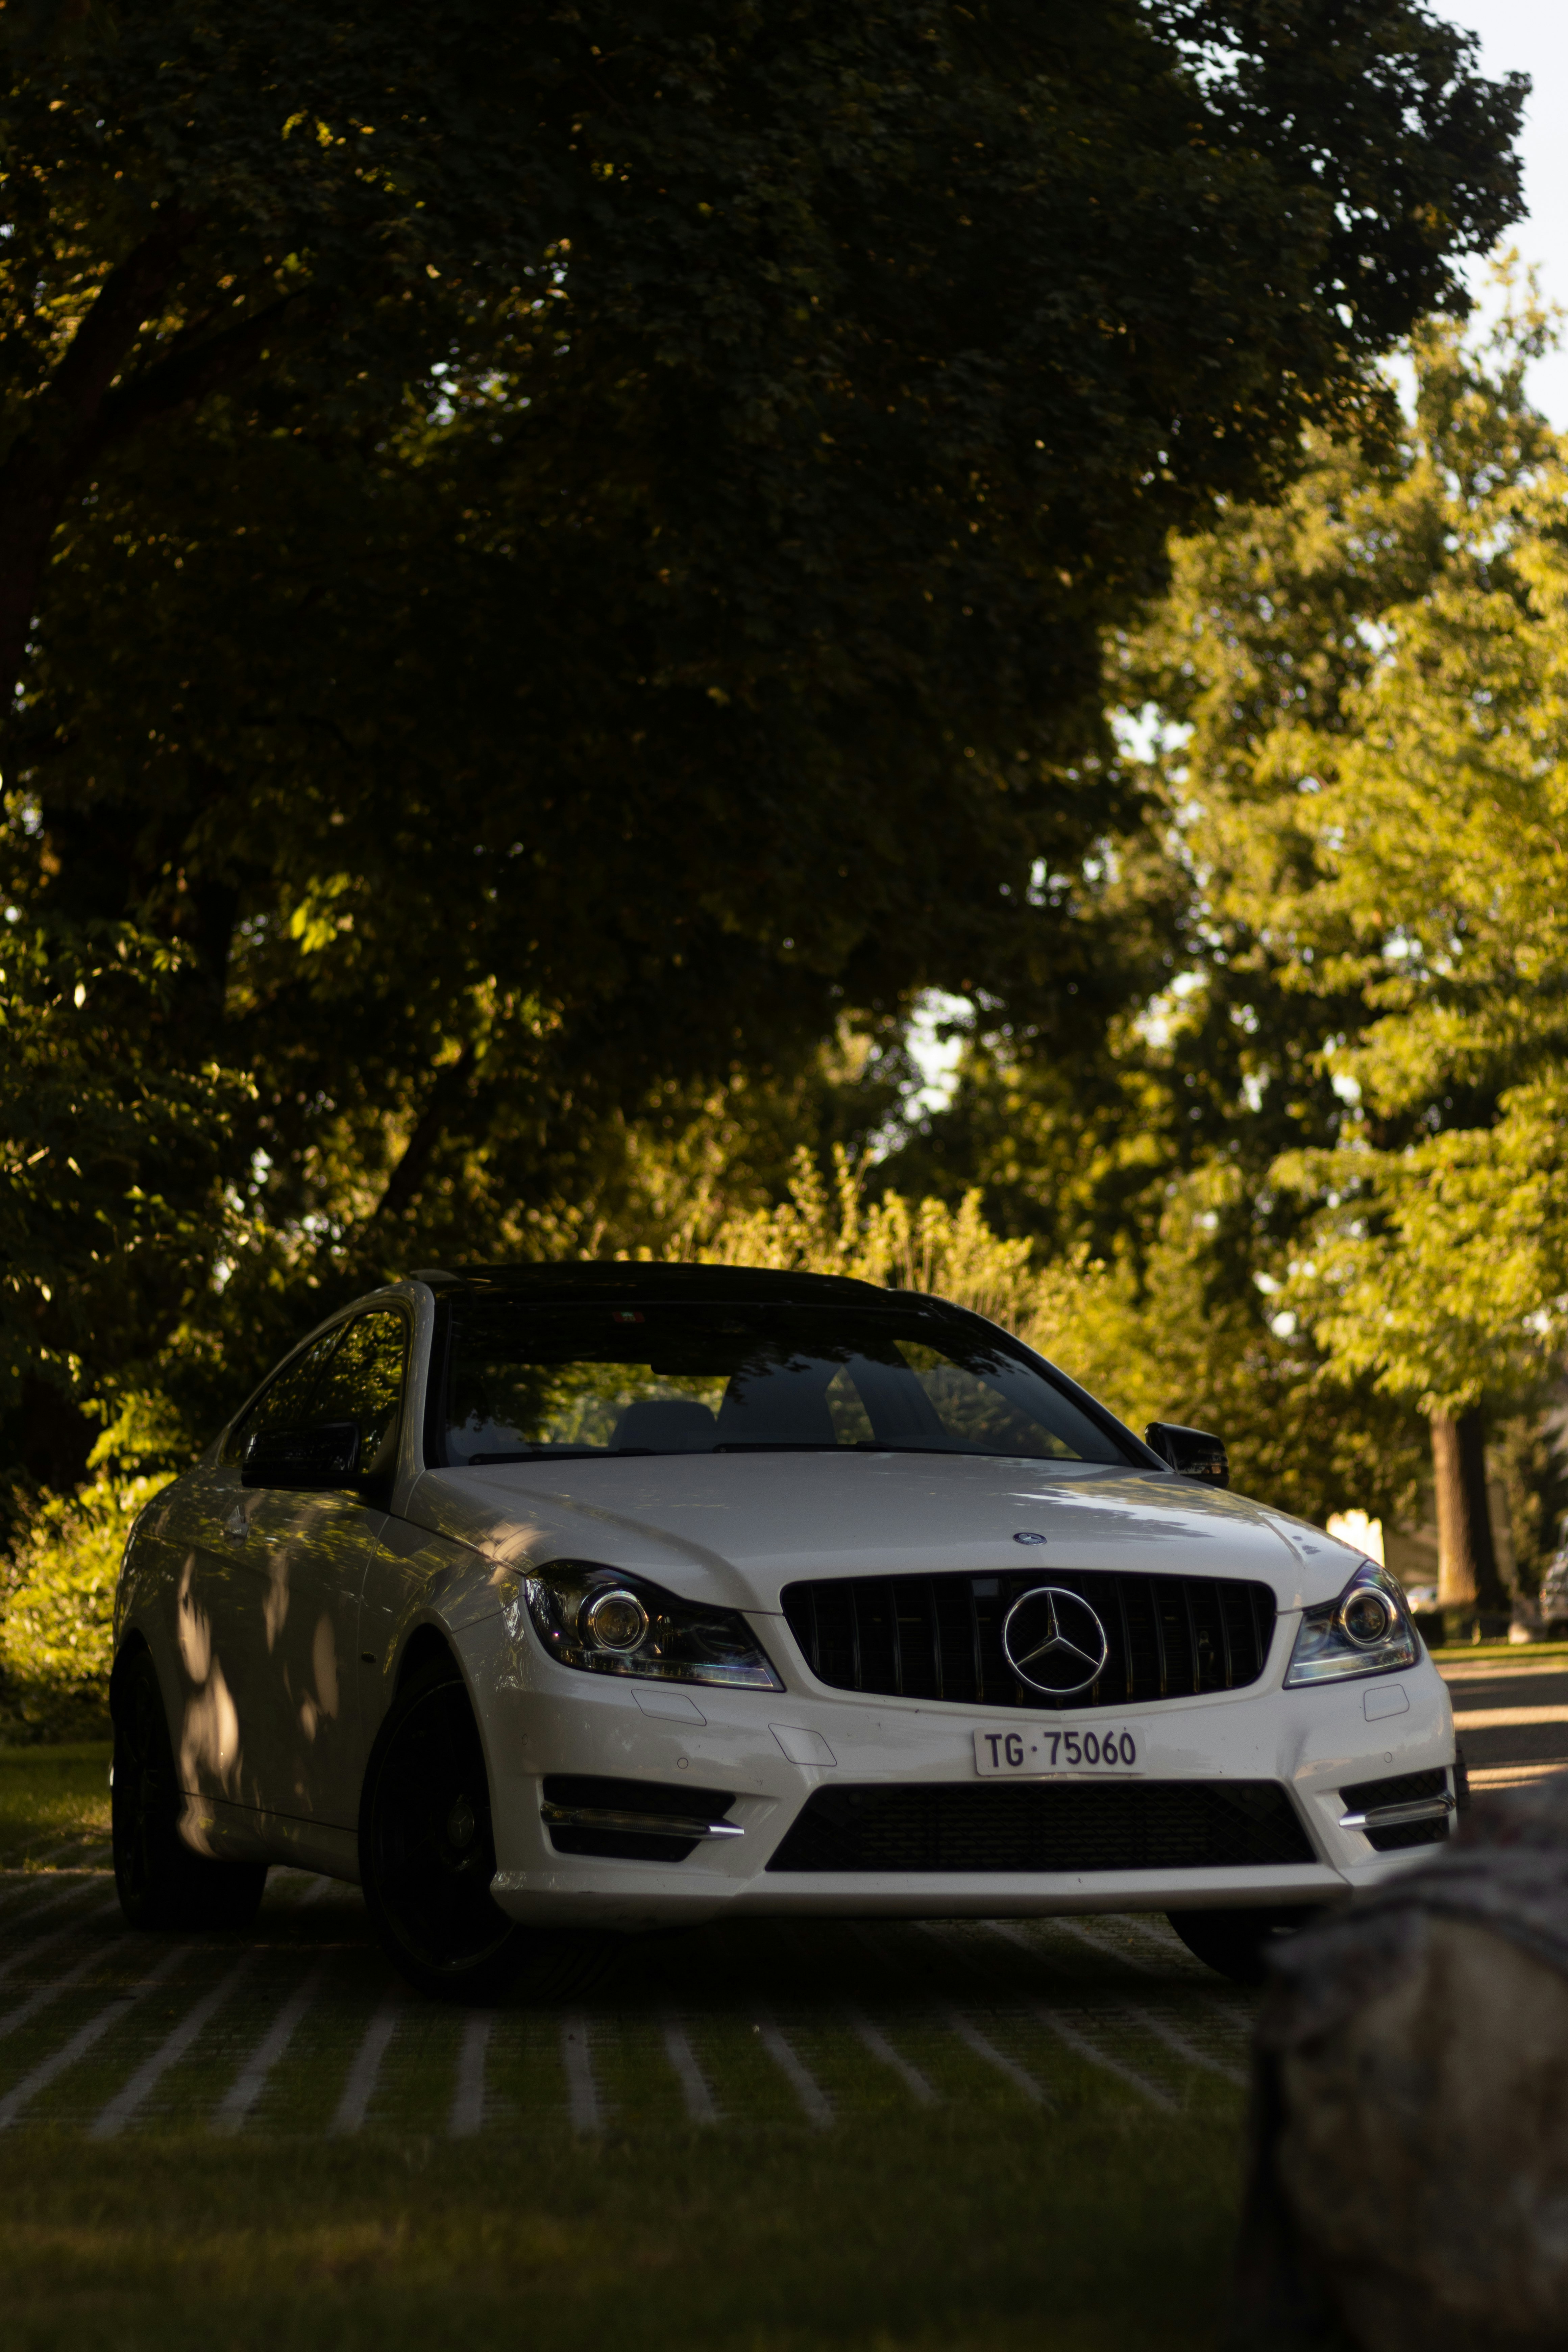 black mercedes benz c class parked near green trees during daytime